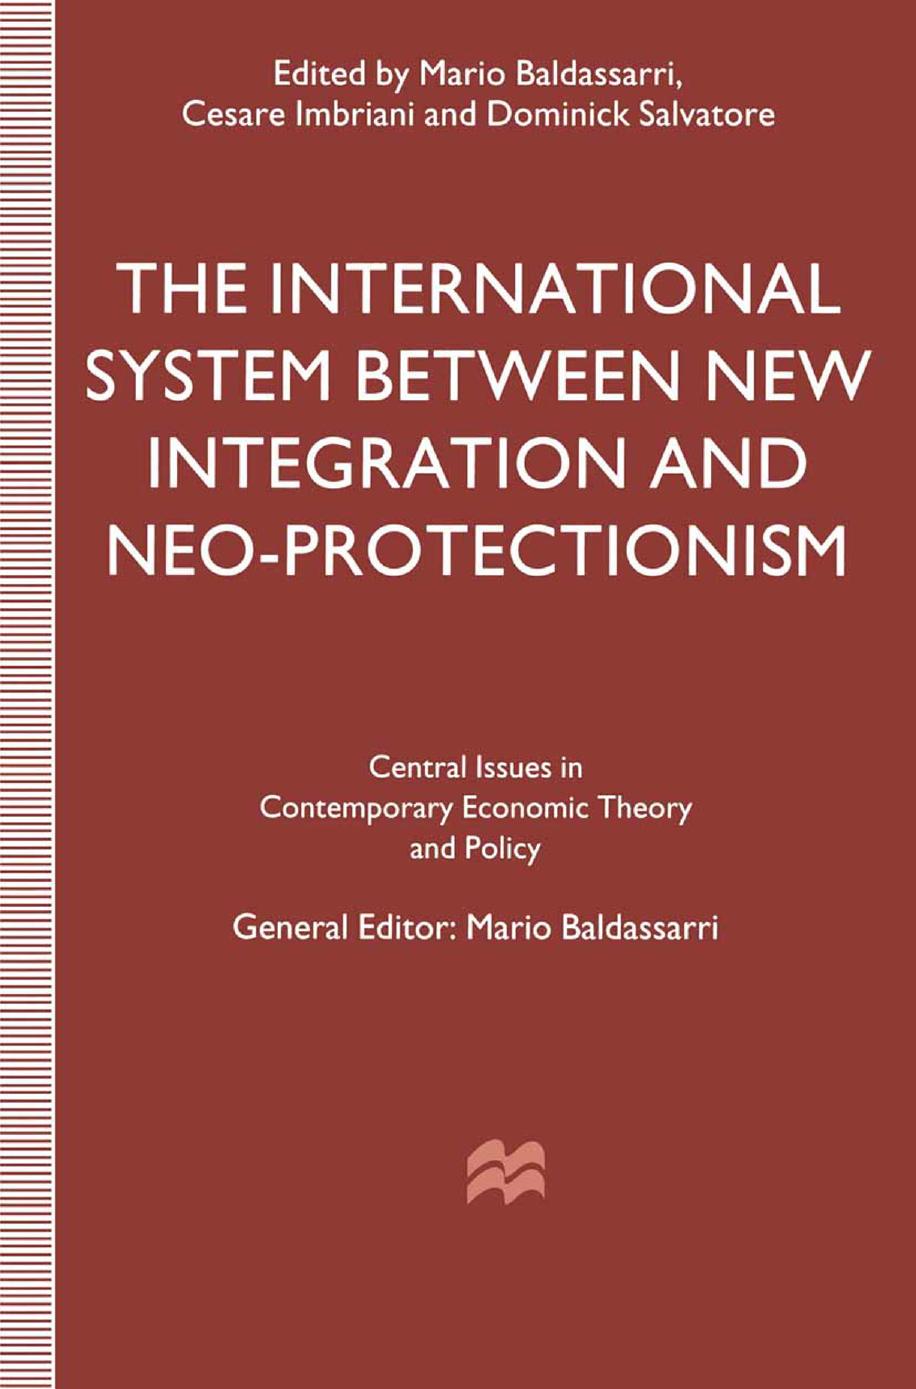 The International System between New Integration and Neo-Protectionism (1996, Palgra